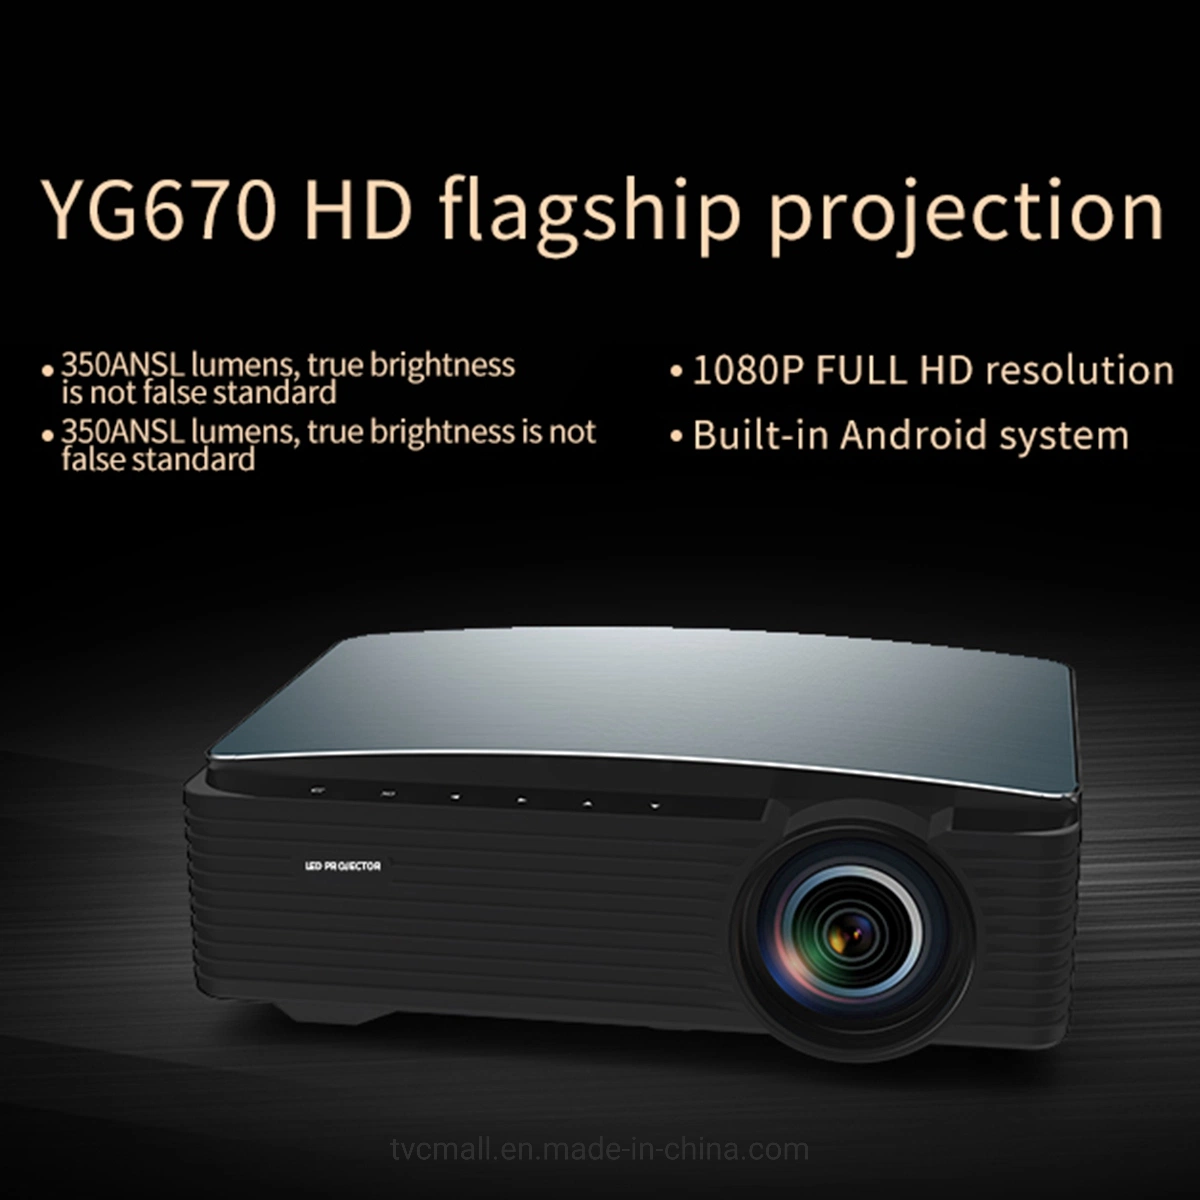 Yg670 Wireless Home Theater HD 1080P Portable Office Business Projector (Android Version) - Us Plug